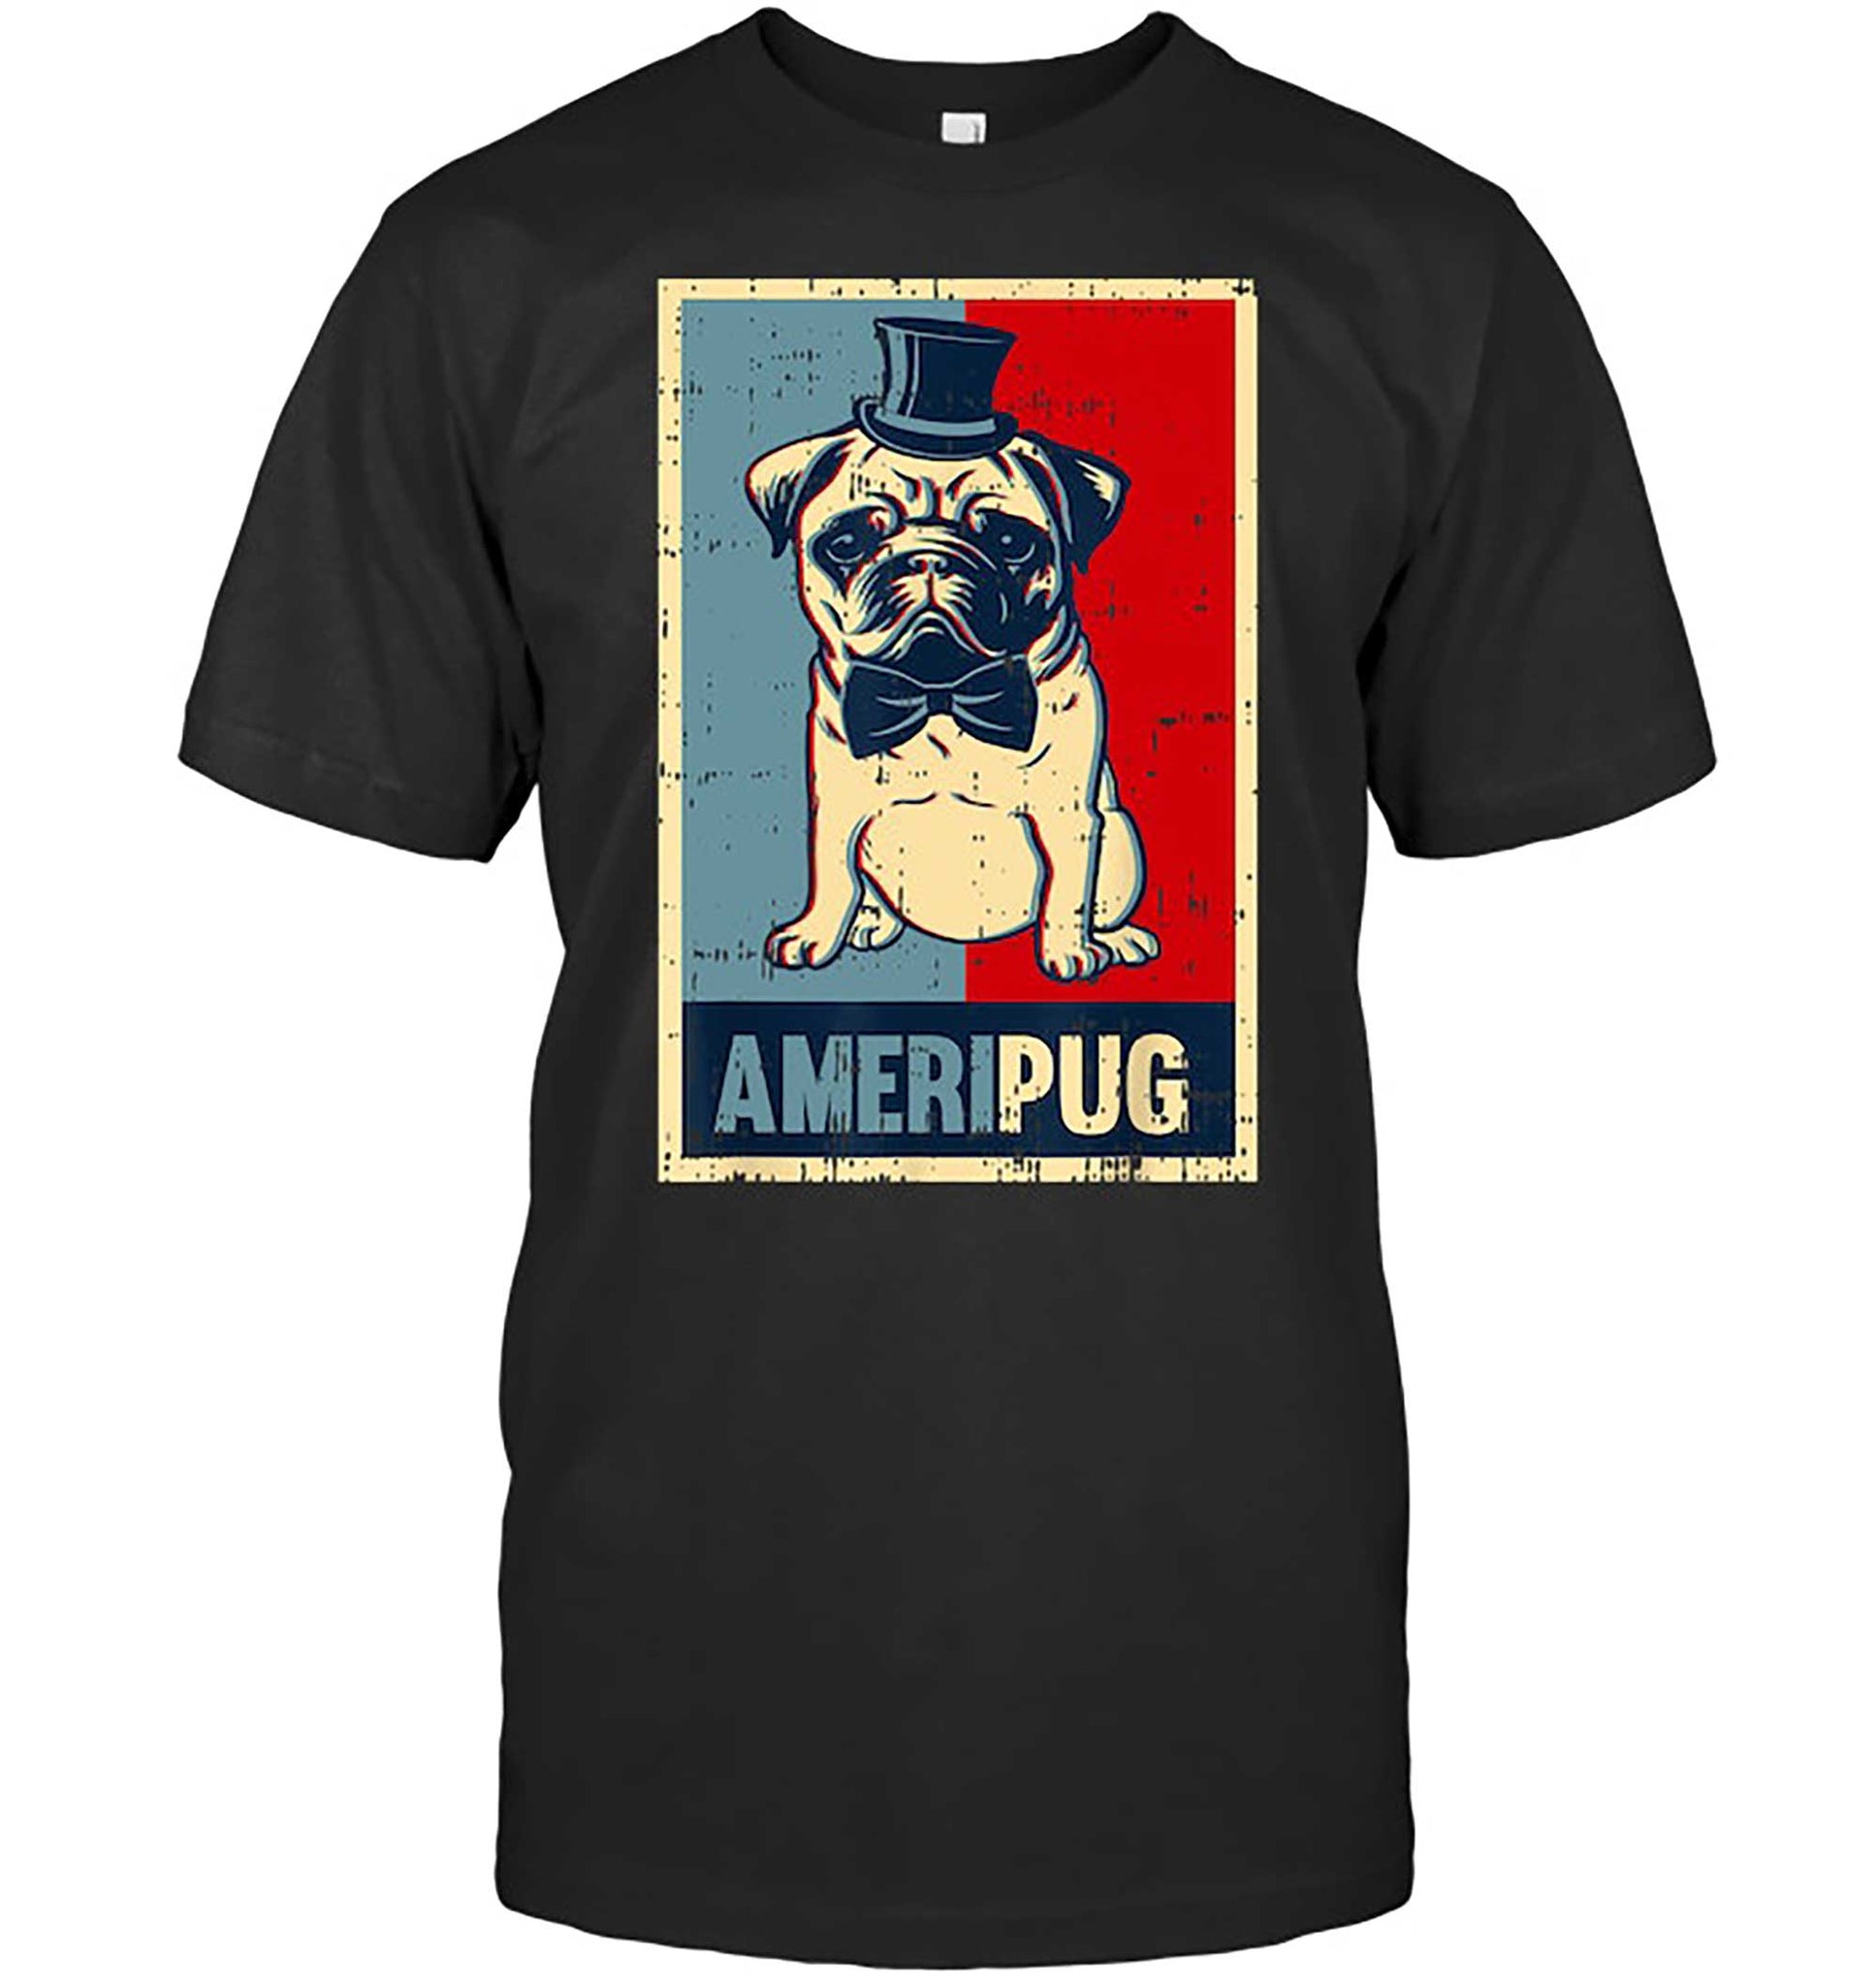 Skitongift-American-Pug-Dog-Tophat-Bowtie-4Th-Of-July-Awesome-Usa-Gifts-T-Shirt-Funny-Shirts-Hoodie-Sweater-Short-Sleeve-Casual-Shirt